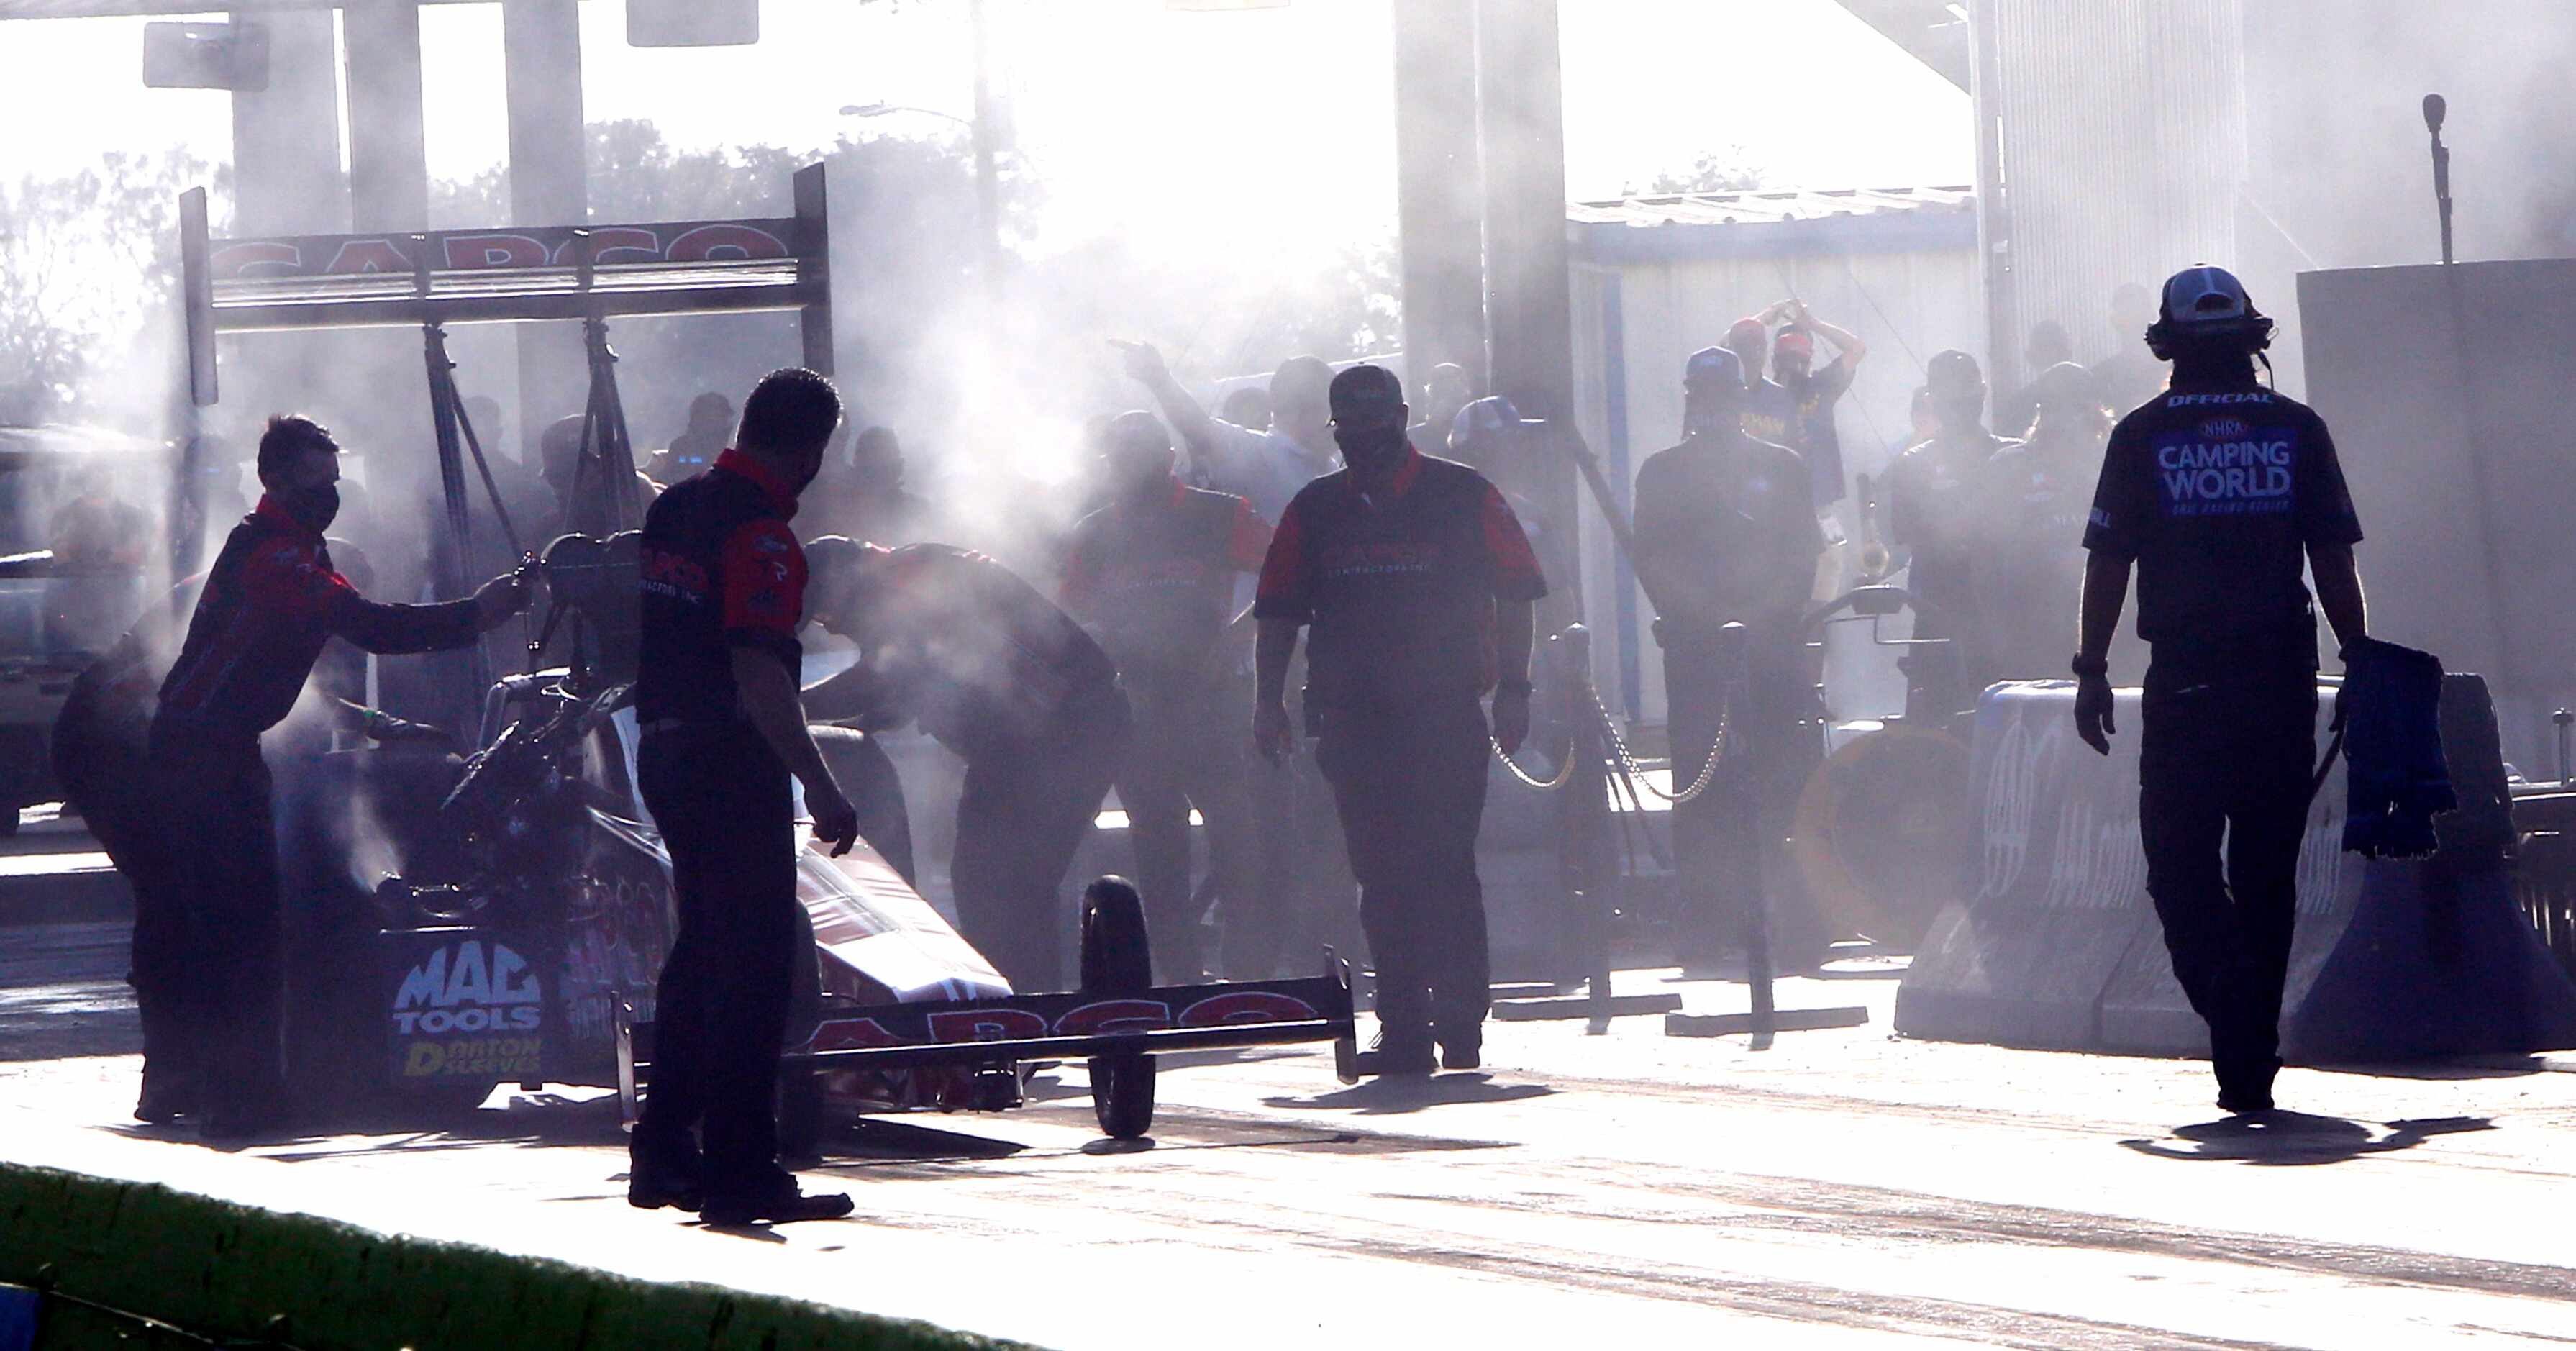 Pit crew members work to prepare a race car under smoky conditions at the starting line.The...